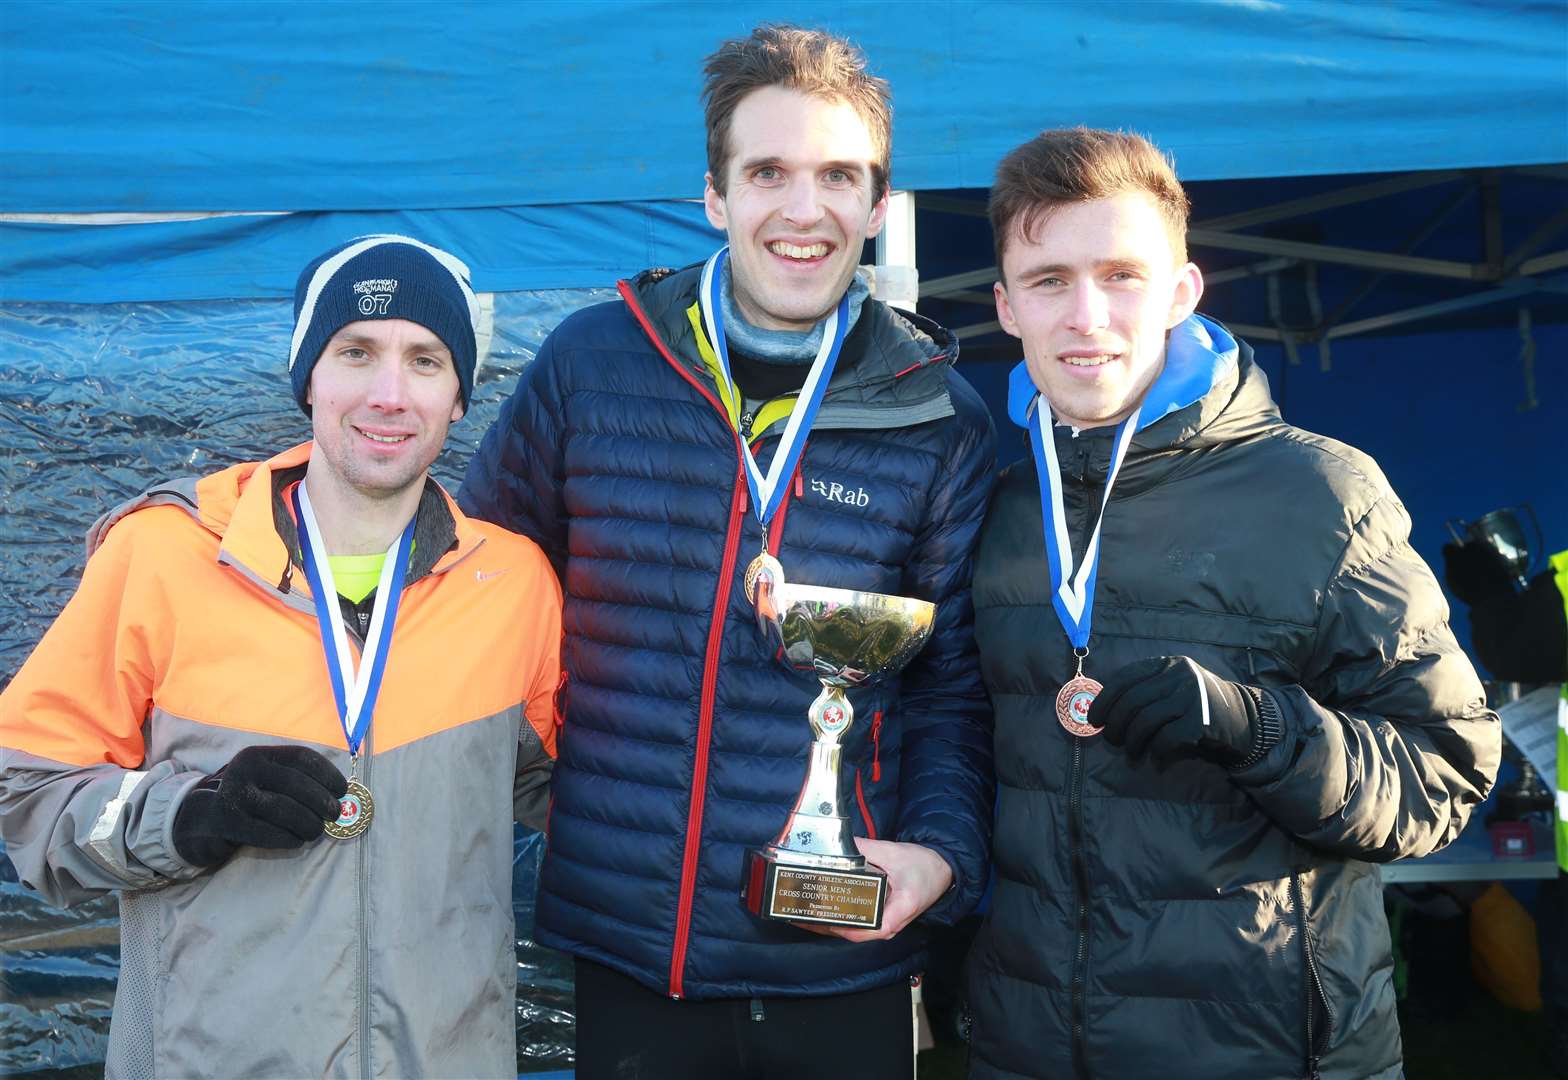 From left, Ben Cole, from Tonbridge AC, came in second, Owen Hind, from Kent AC, the winner and Corey De' Ath, from Tonbridge AC, came in third in the senior men's race at the Kent Cross-Country Championships Picture: John Westhrop FM25930169